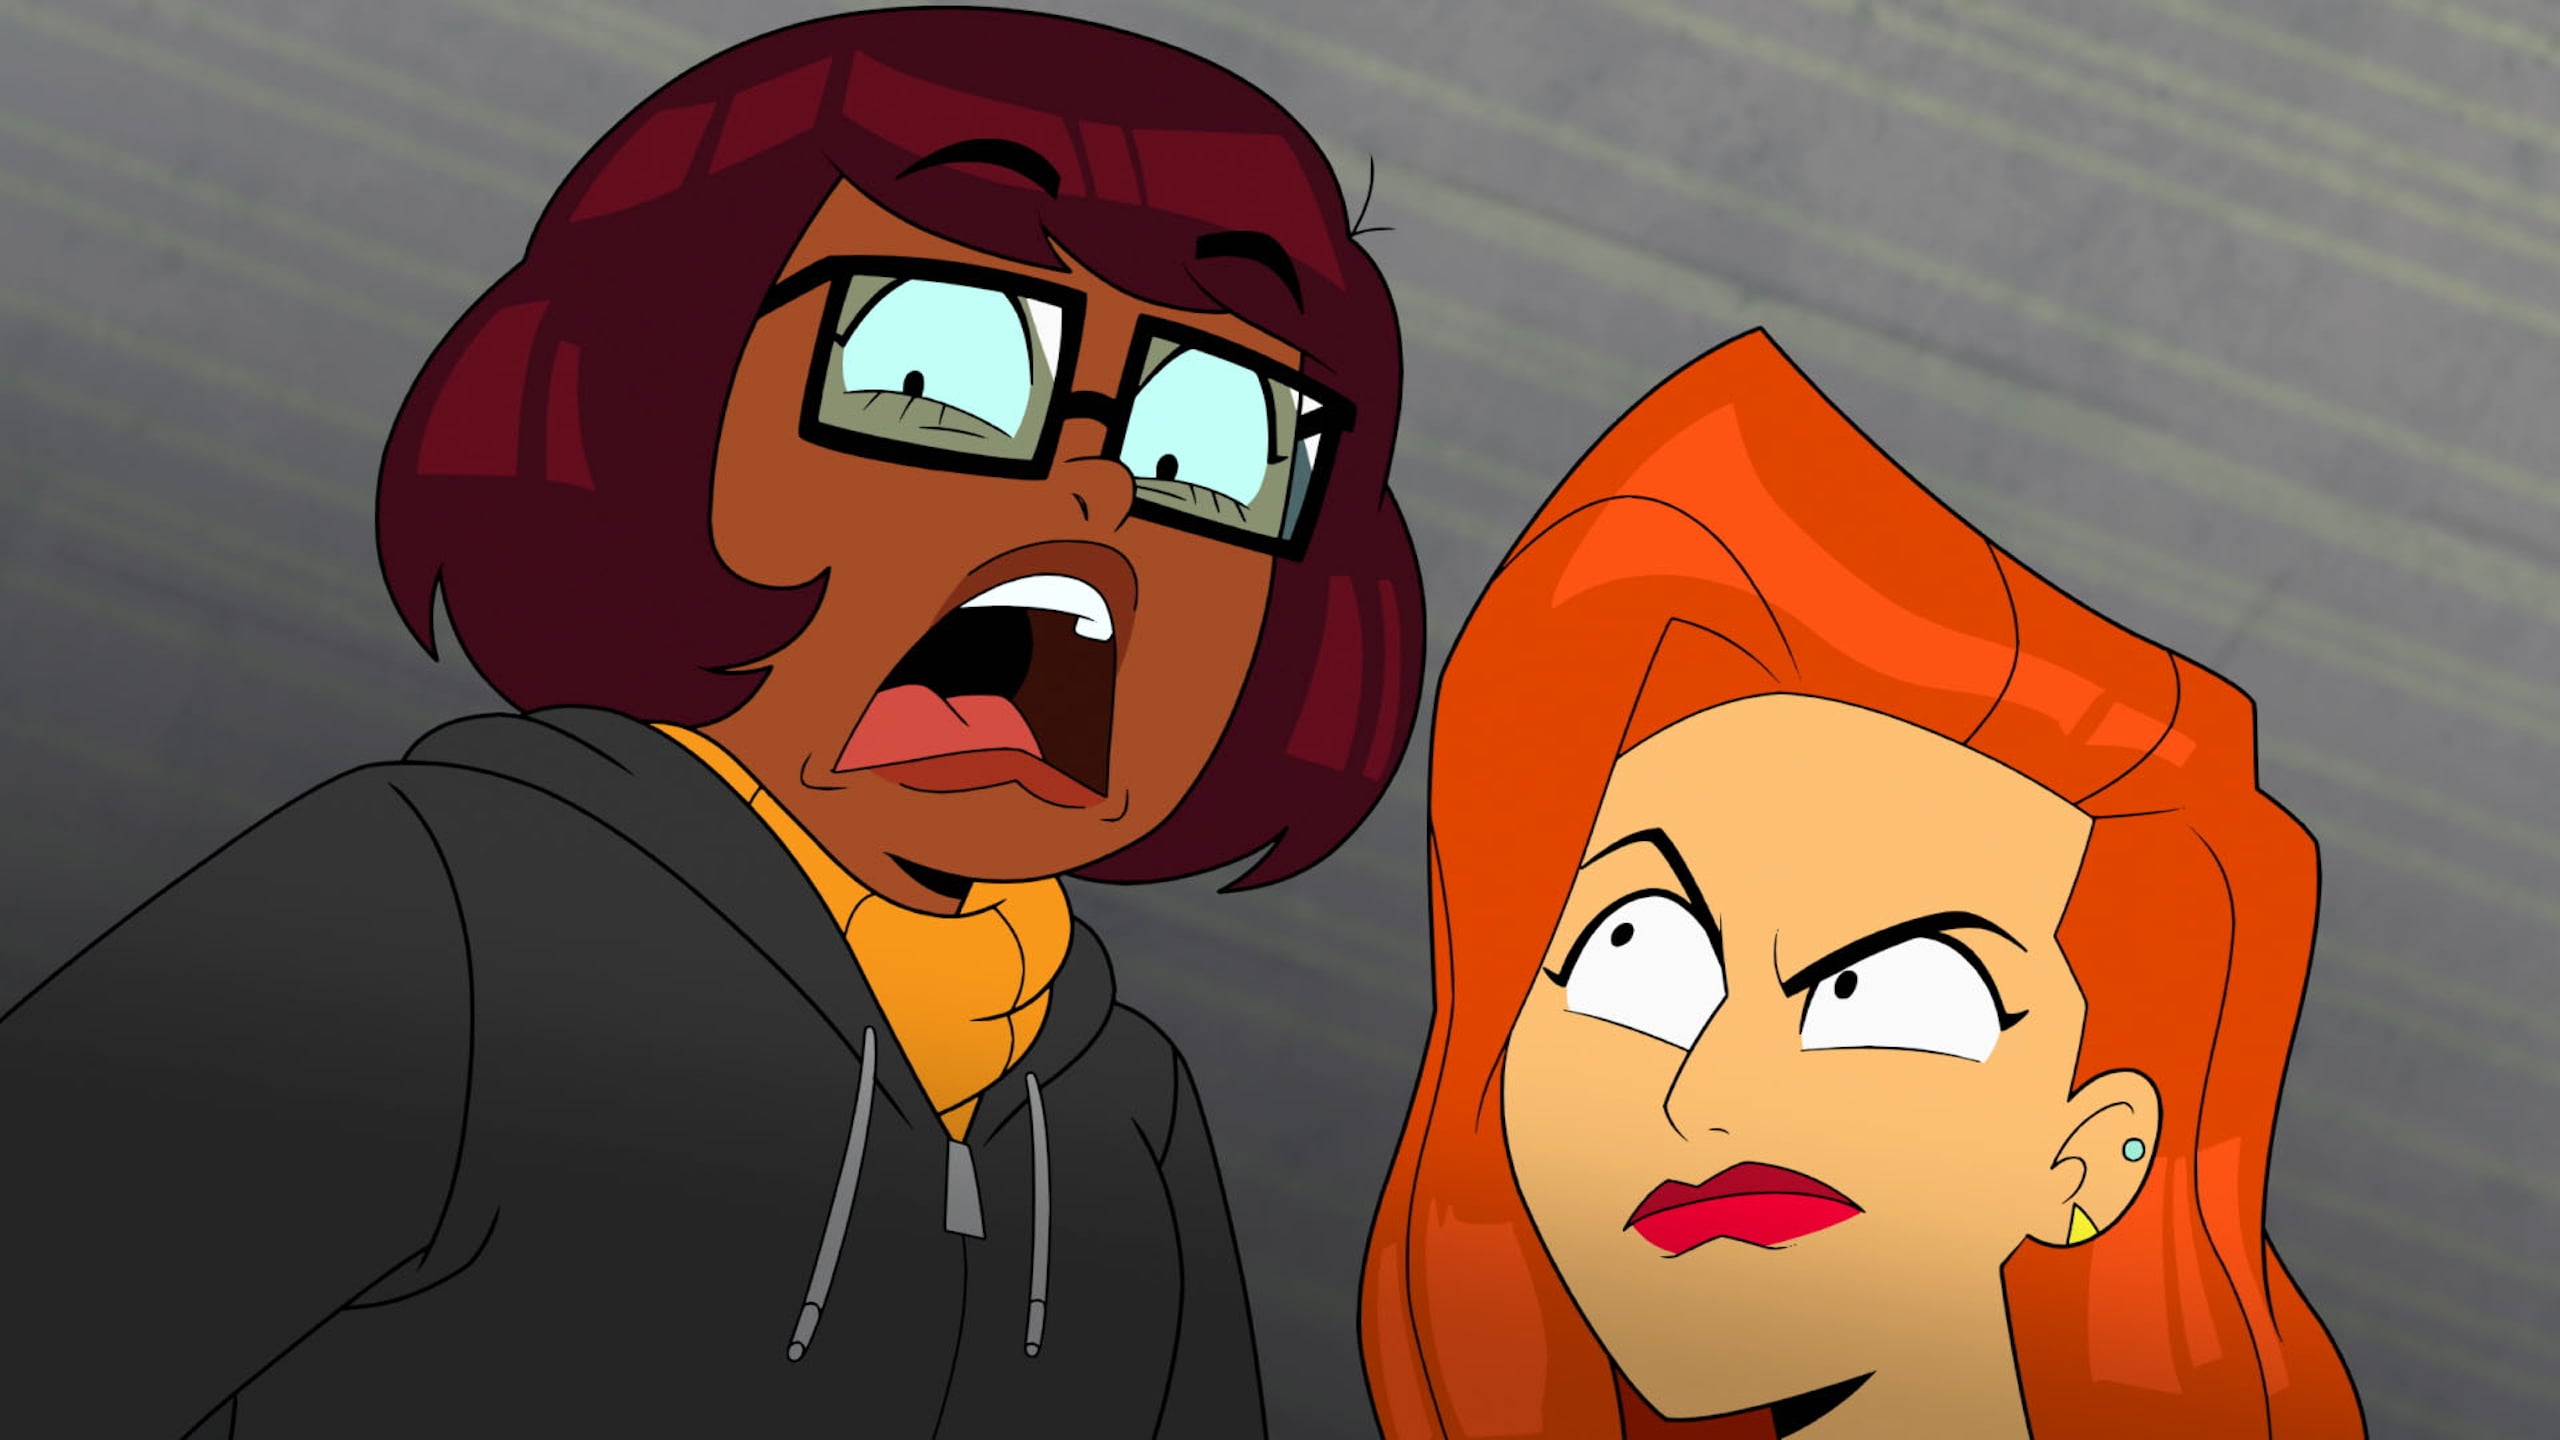 Velma and Daphne's Relationship: Are They More Than Friends?